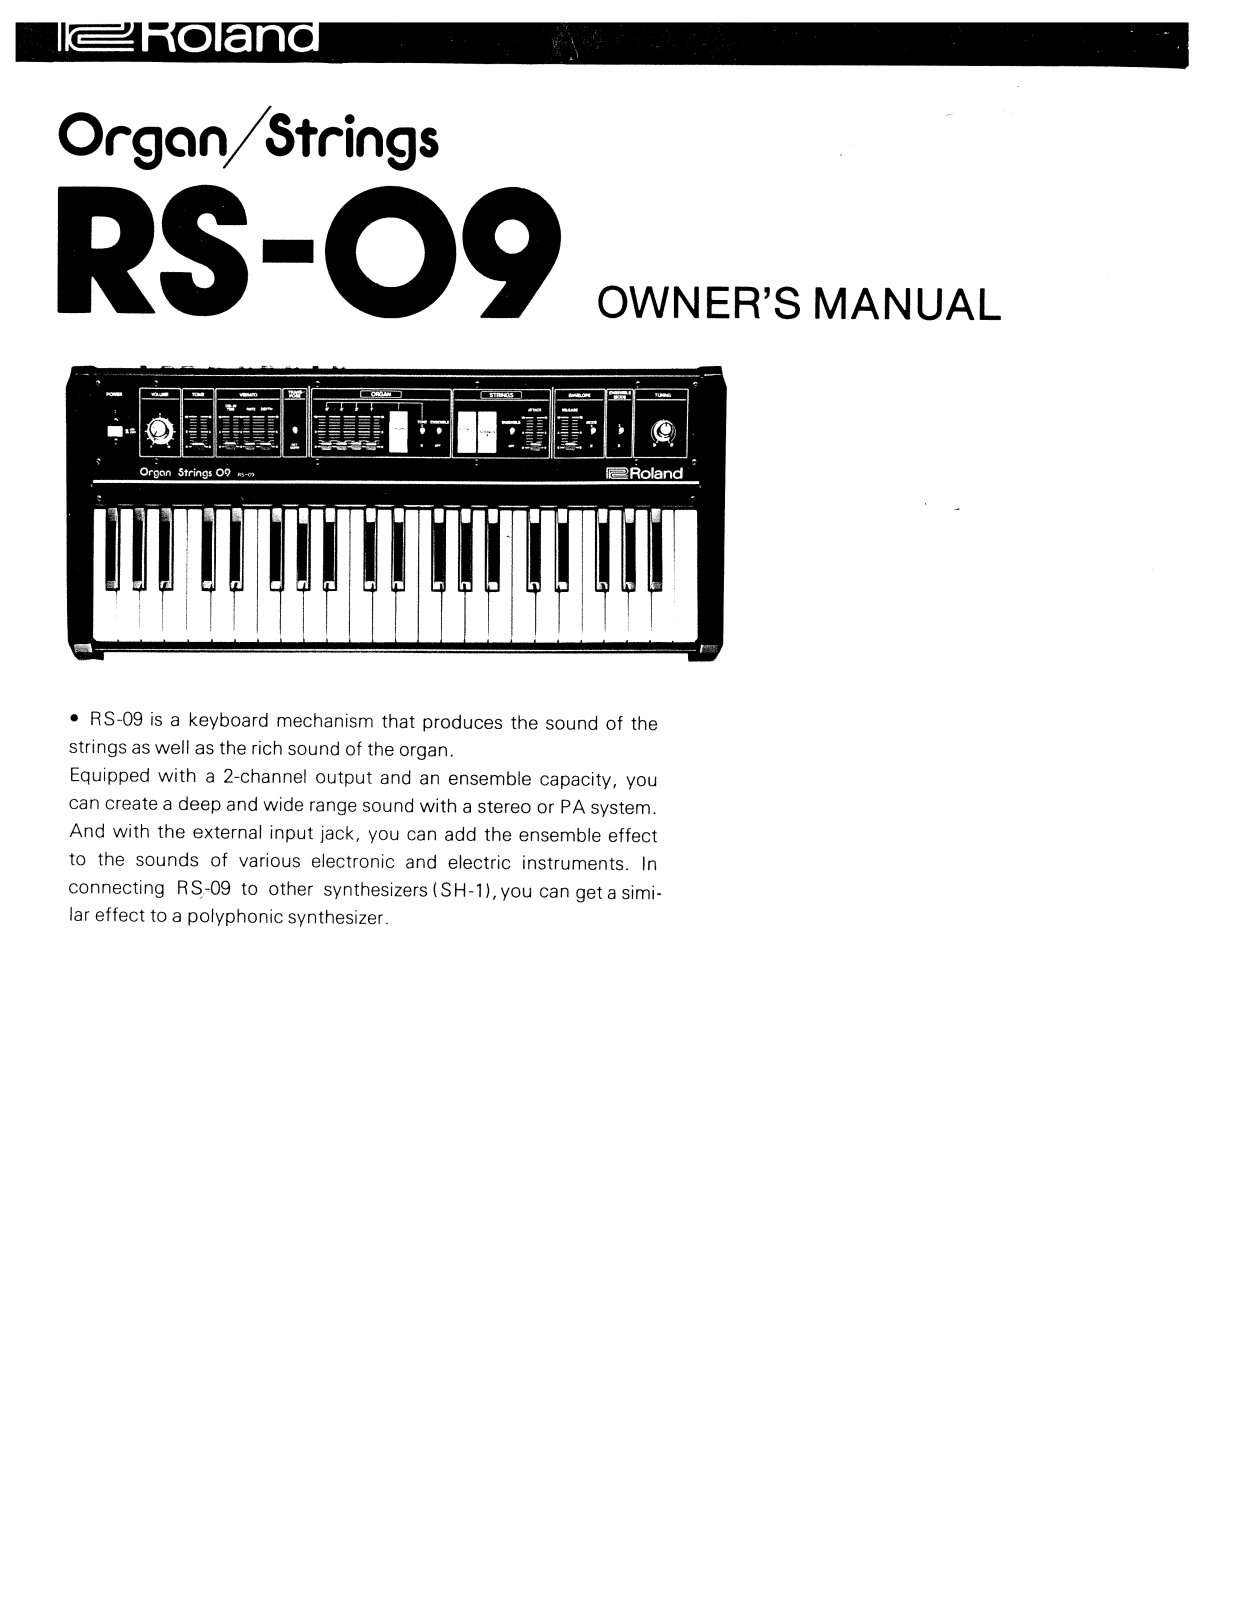 Roland RS-09 User Manual